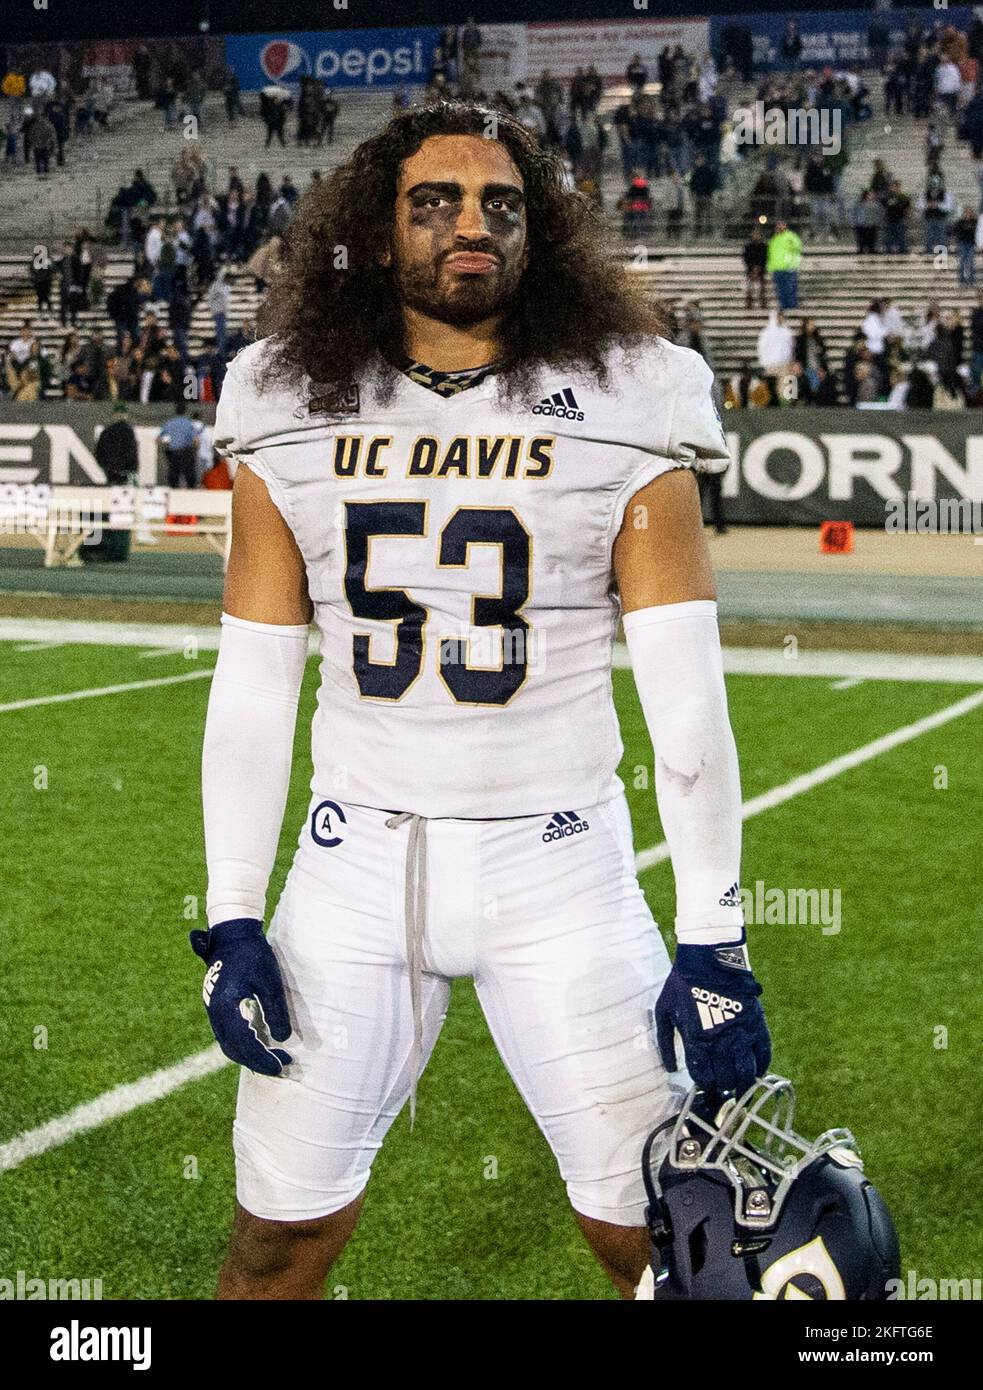 Hornet Stadium. 19th Nov, 2022. U.S.A. UC Davis linebacker Nick Eaton (53) stands in disbelief after a lost in the NCAA Causeway Classic Football game between UC Davis Aggies and the Sacramento State Hornets. Sacramento State beat UC Davis 27-21 at Hornet Stadium. Thurman James/CSM/Alamy Live News Stock Photo